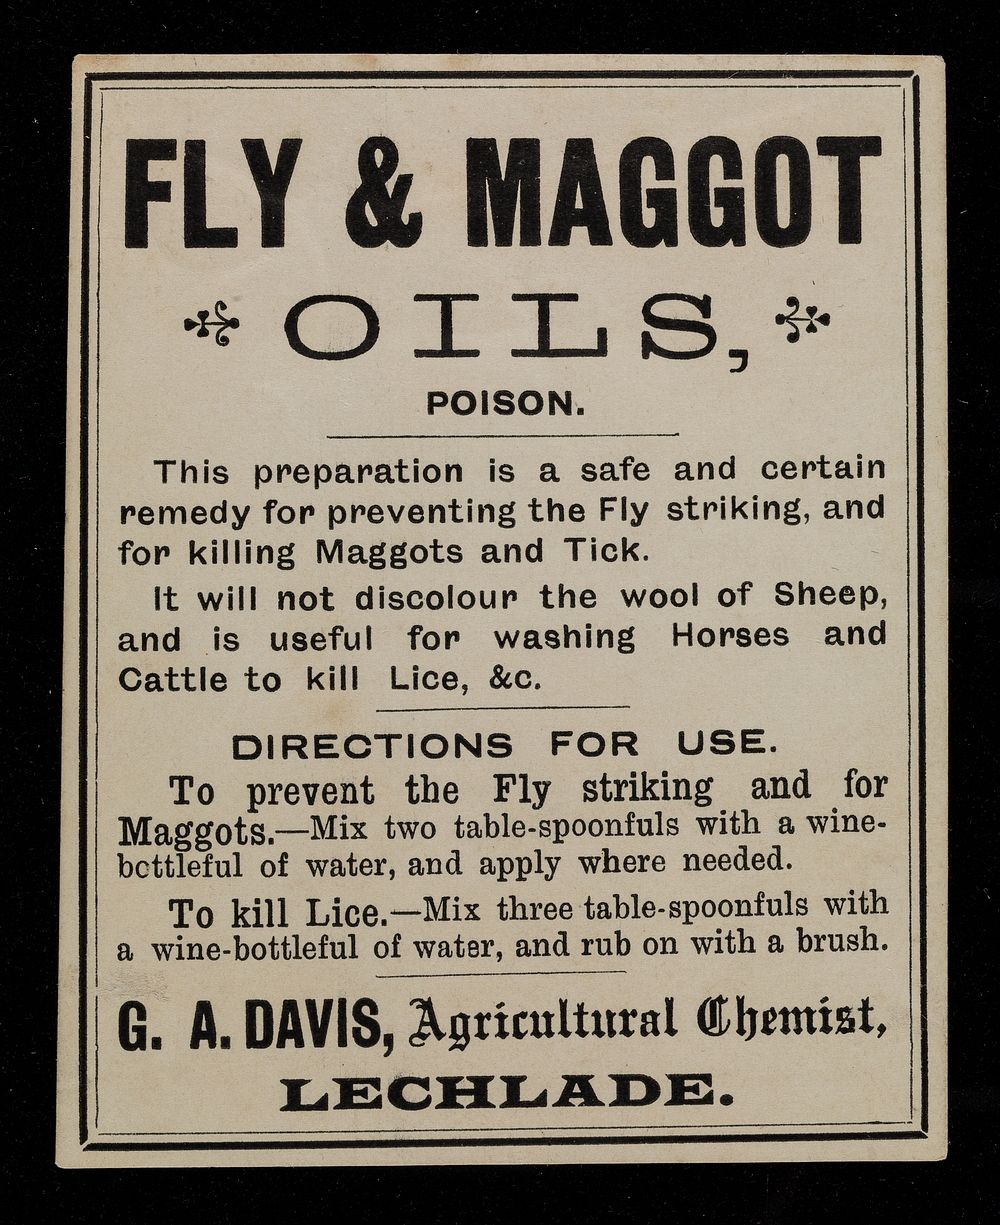 Fly and maggot oils, poison : this preparation is a safe and certain remedy for preventing the Fly striking, and for killing…